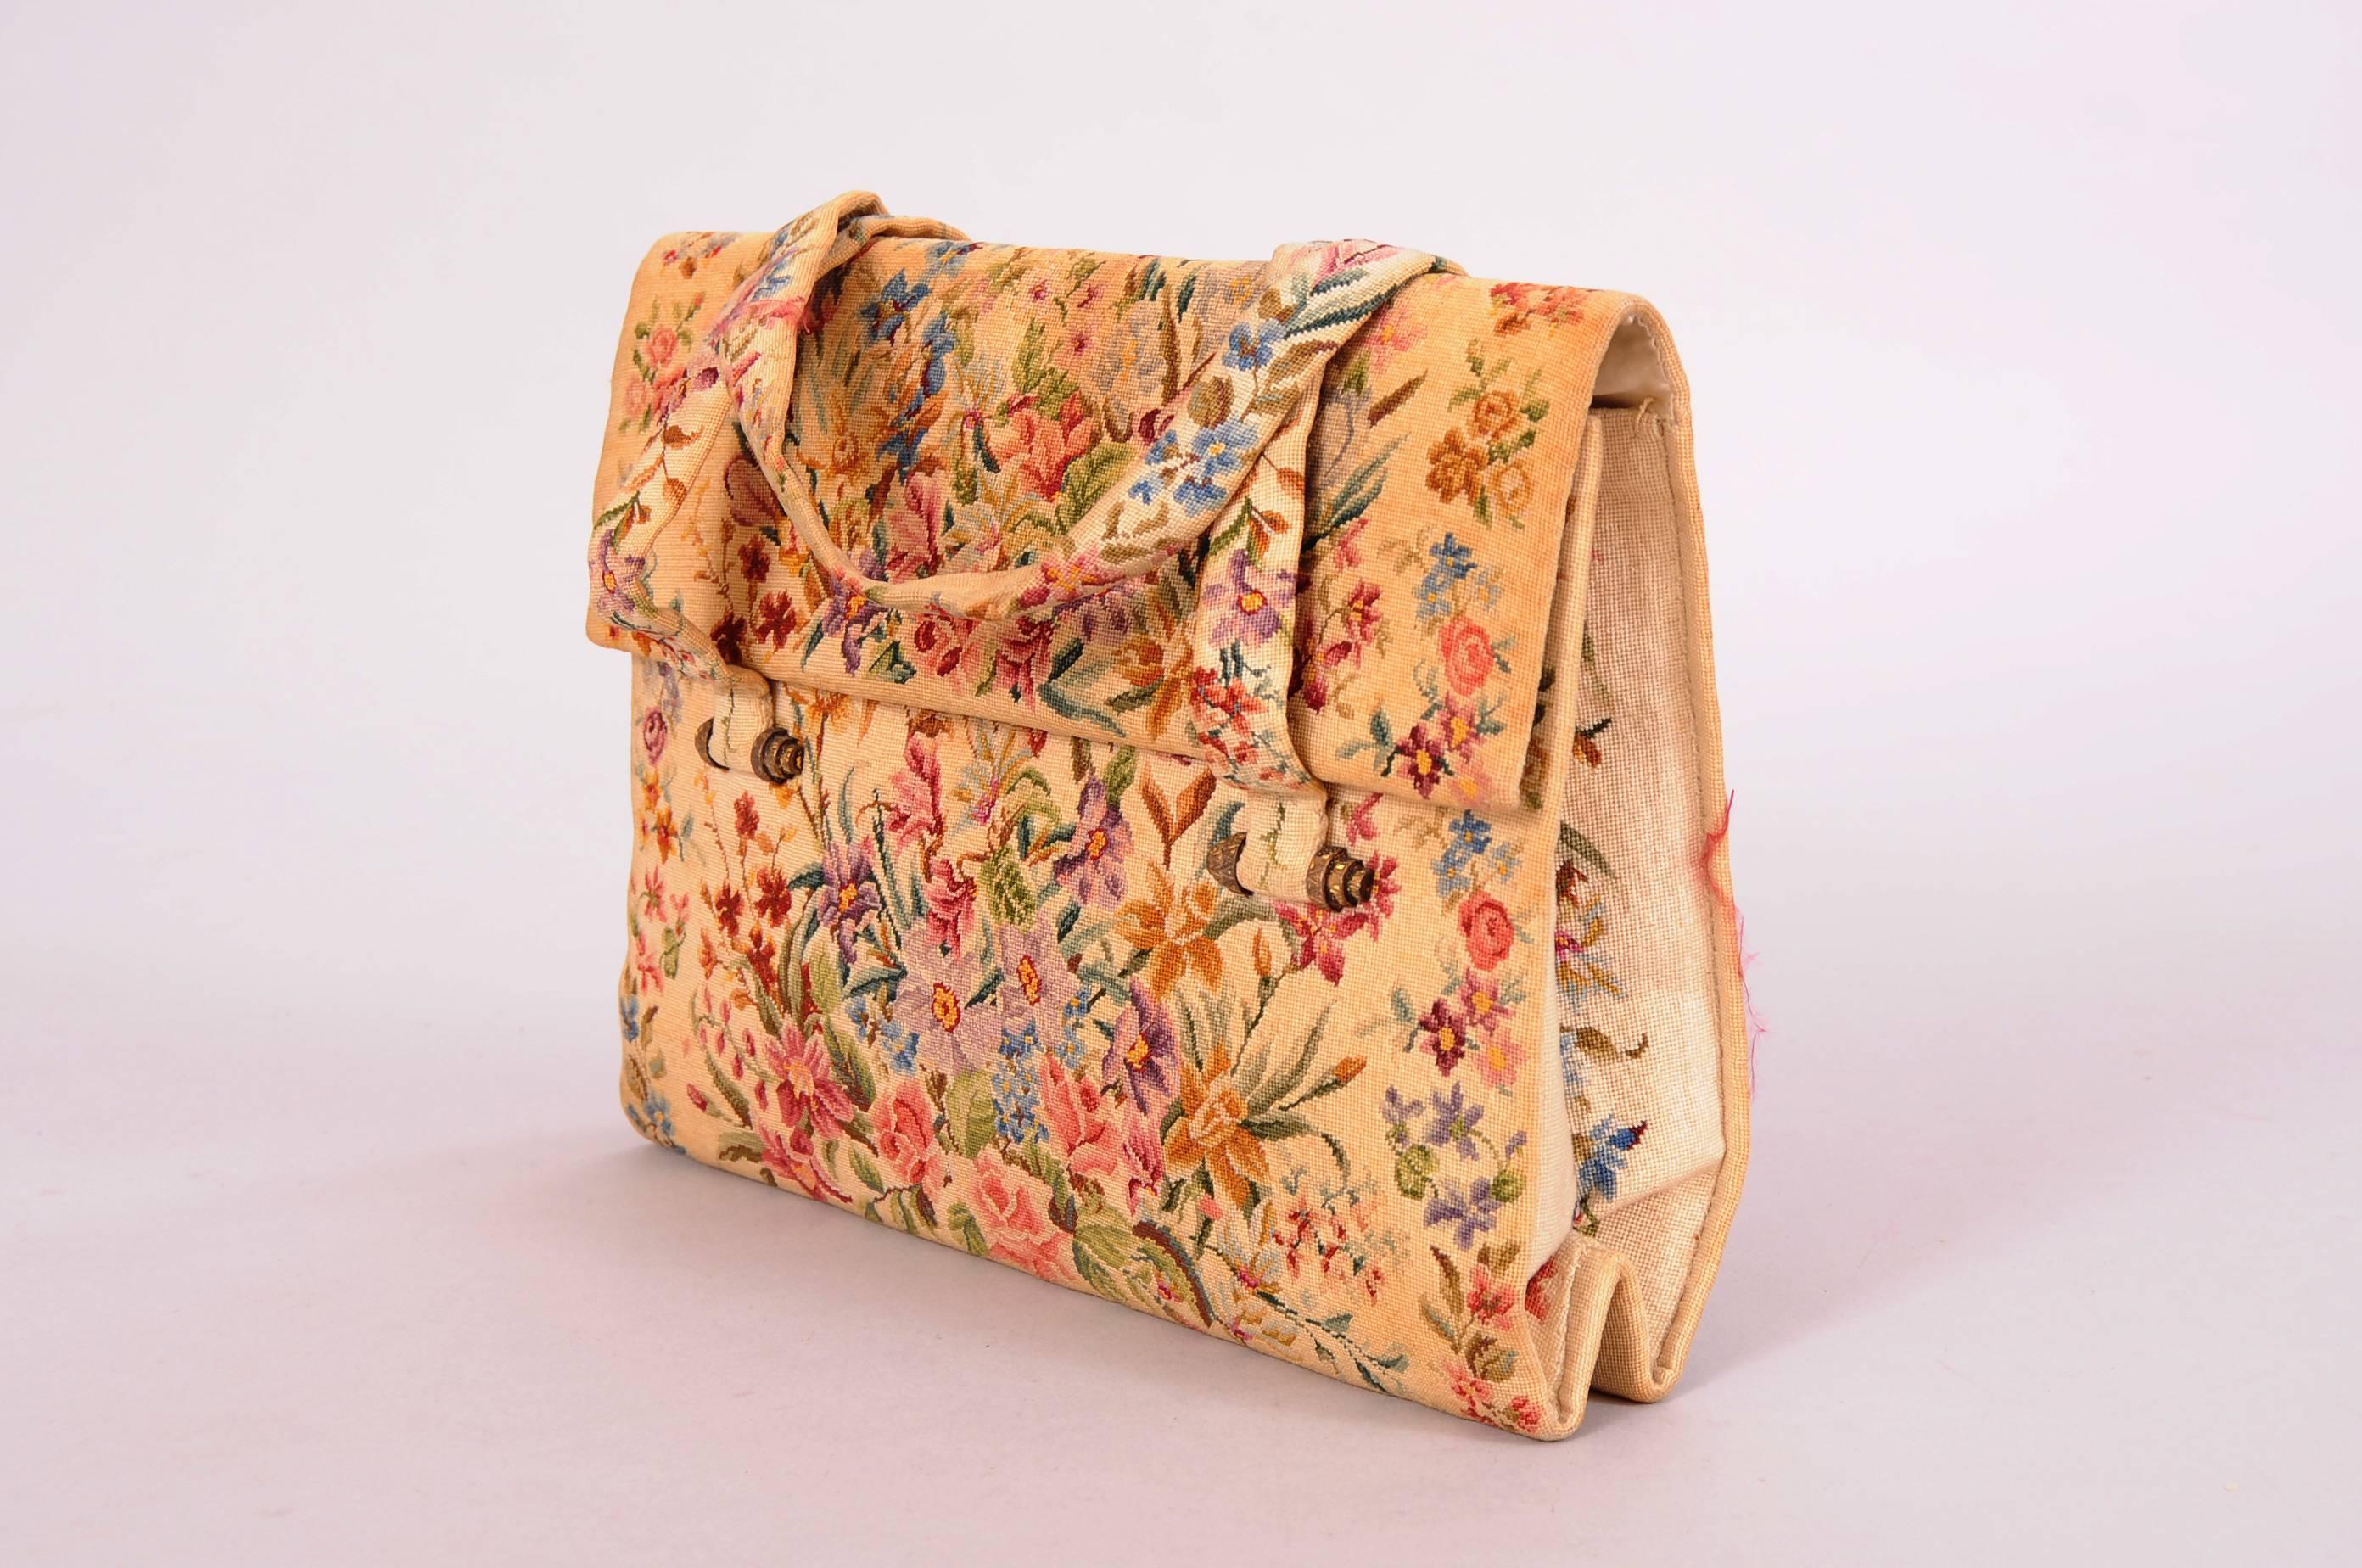 This elegant petit point bag is worked on the smallest scale and is beautifully done. The multi color floral bouquets cover the front and back of the bag with a border of flowers on each side. This border is also used for the handles. The bag is